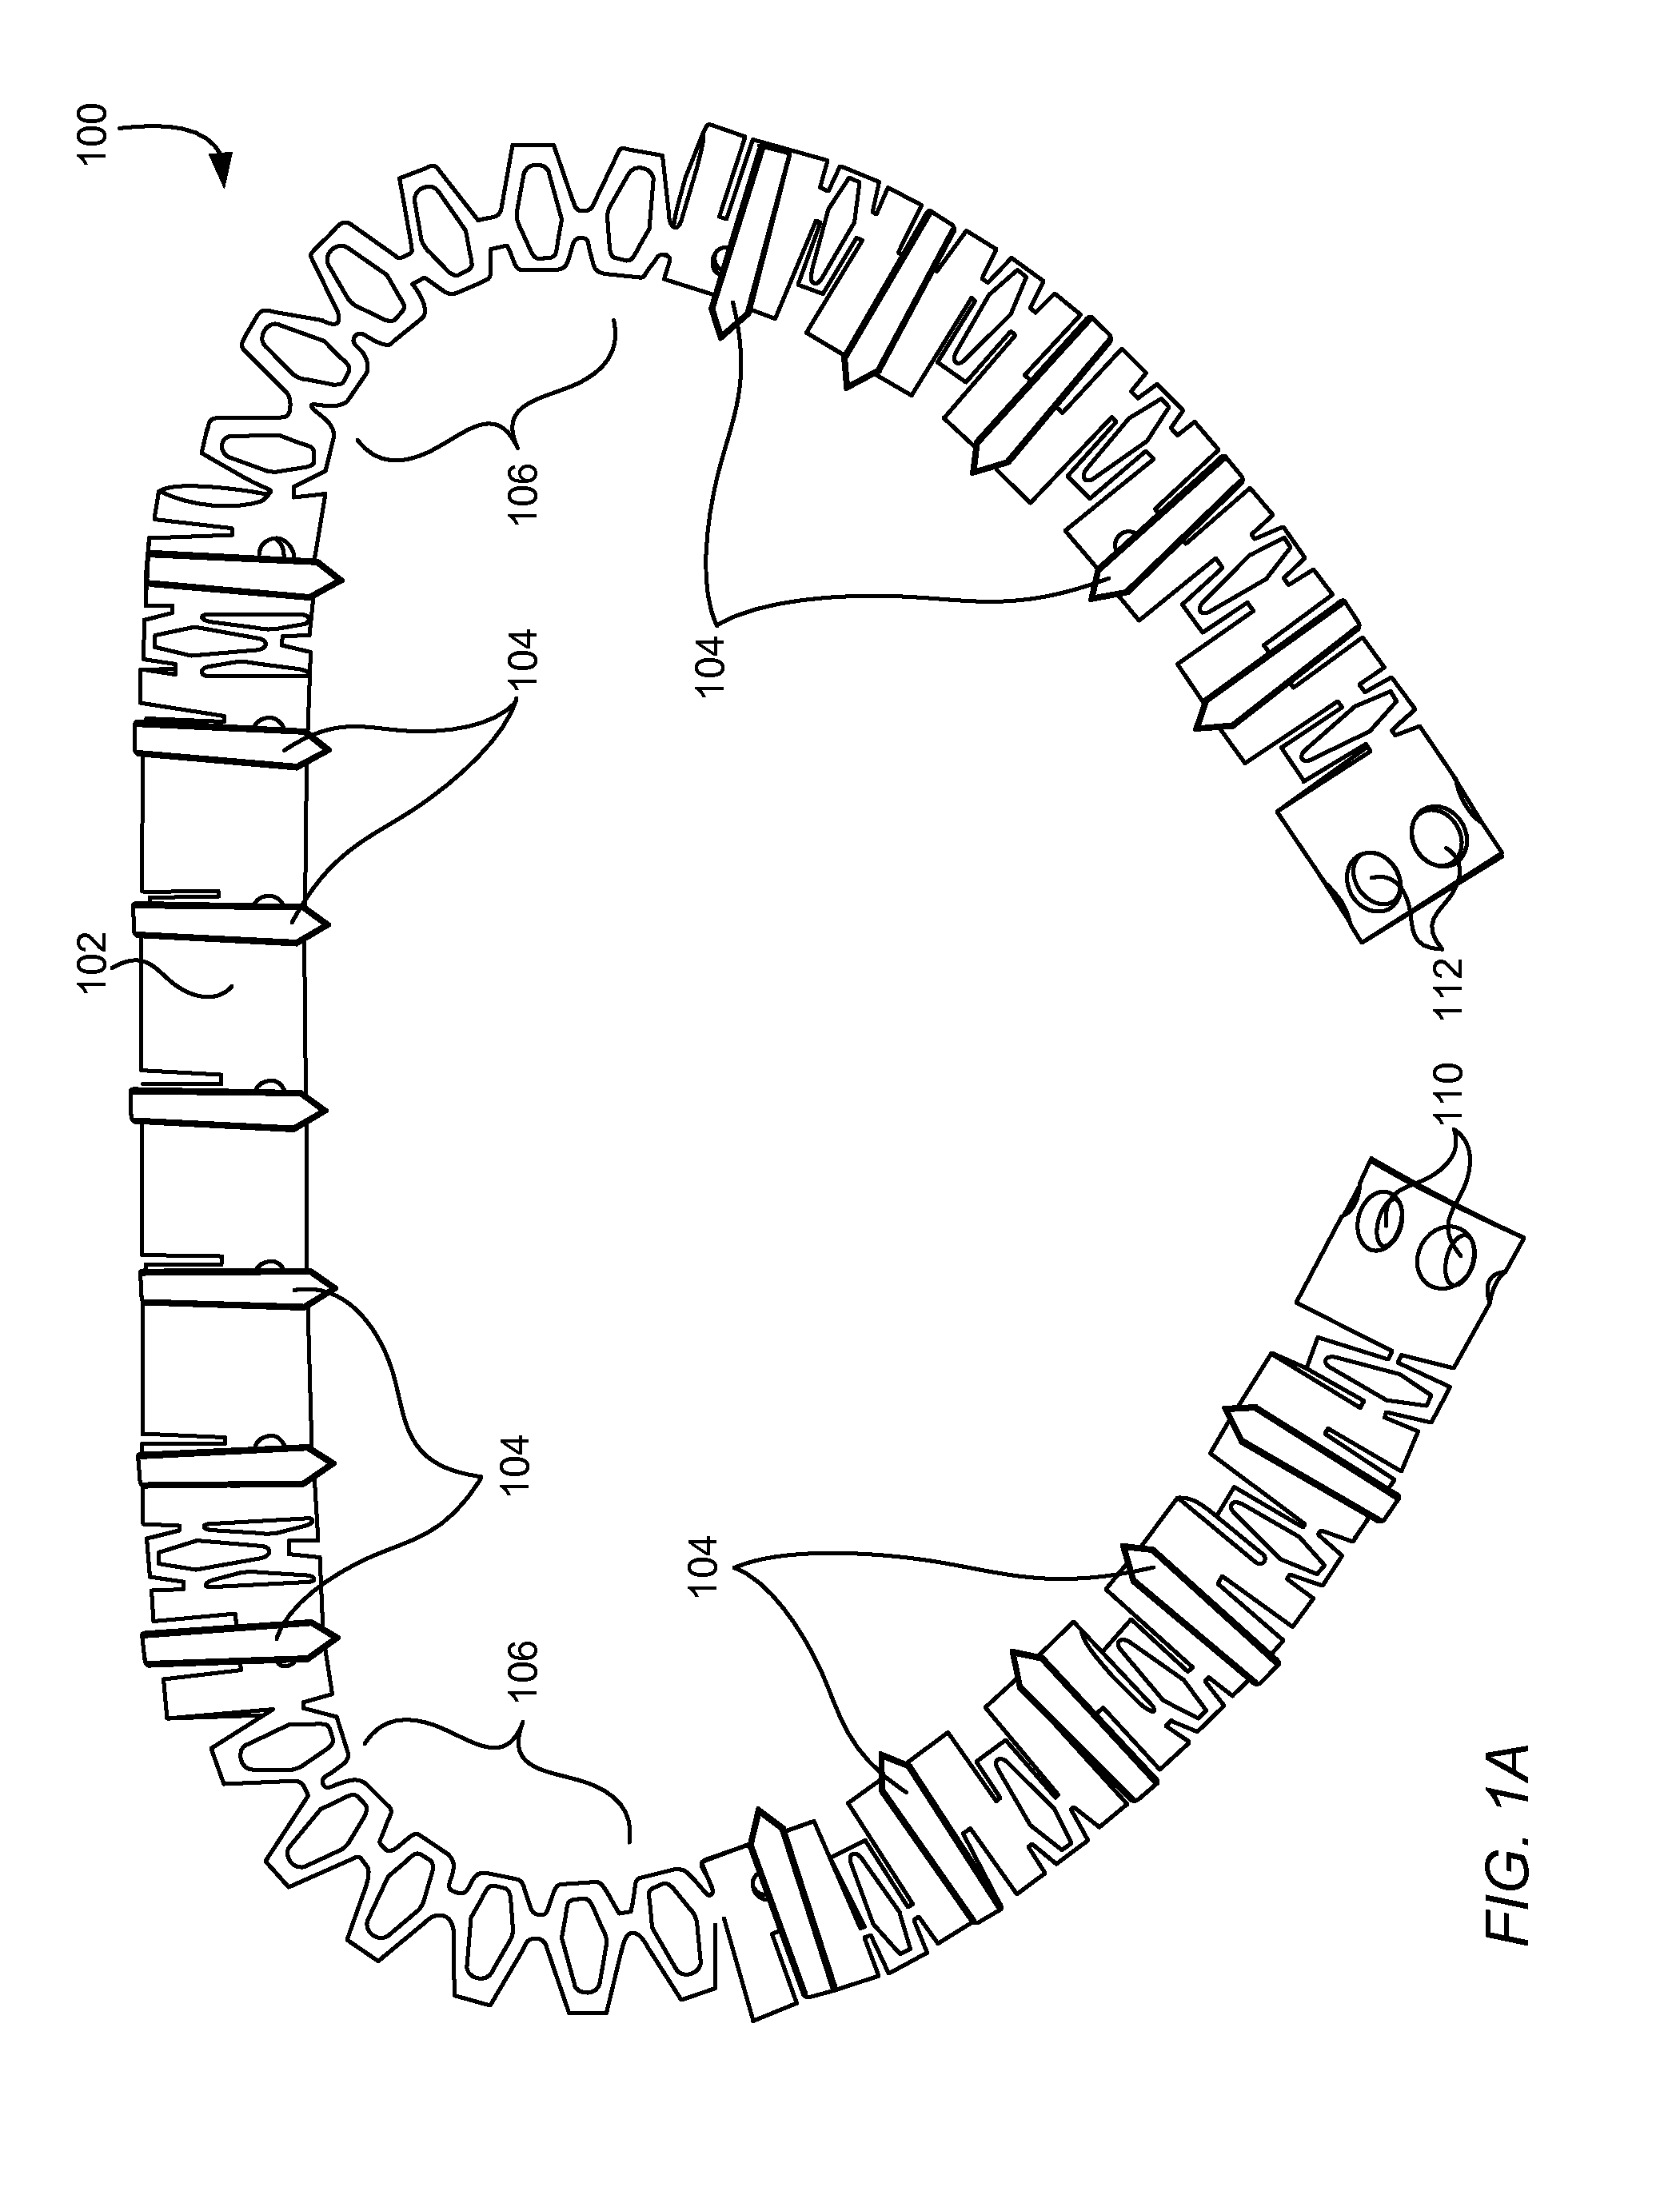 Methods, devices, and systems for percutaneously anchoring annuloplasty rings